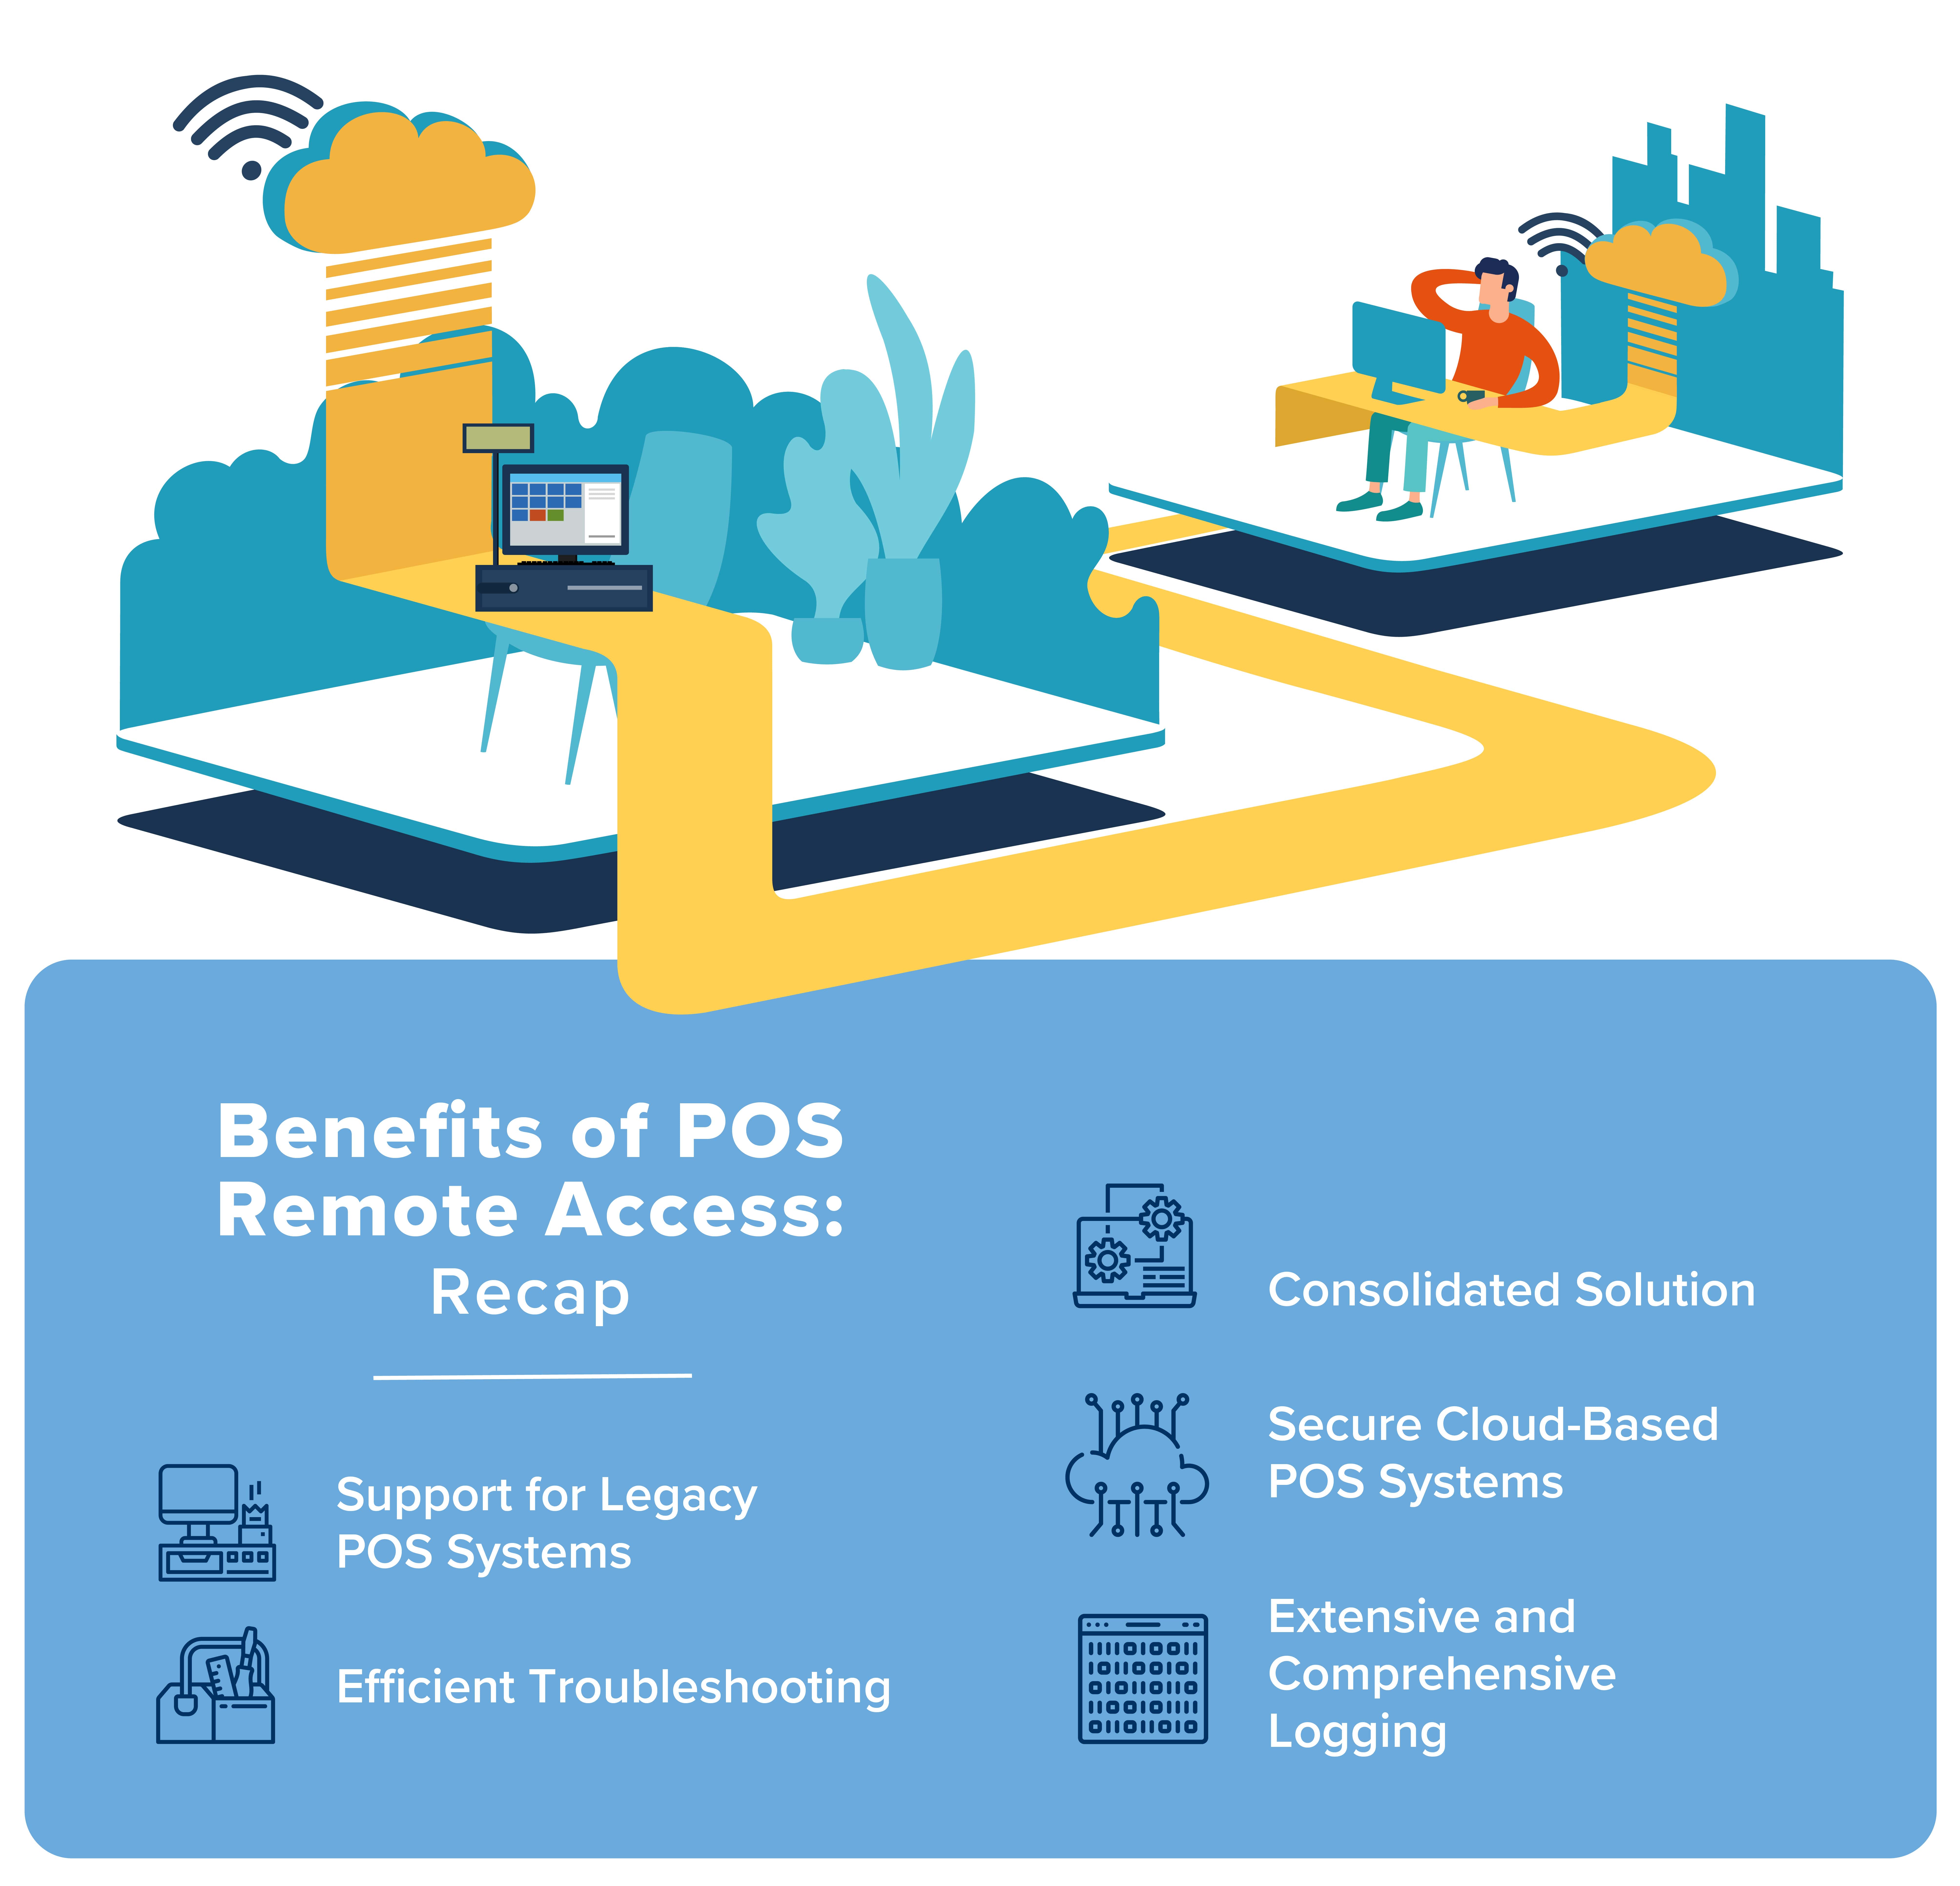 Graphic recapping 5 benefits of POS remote access